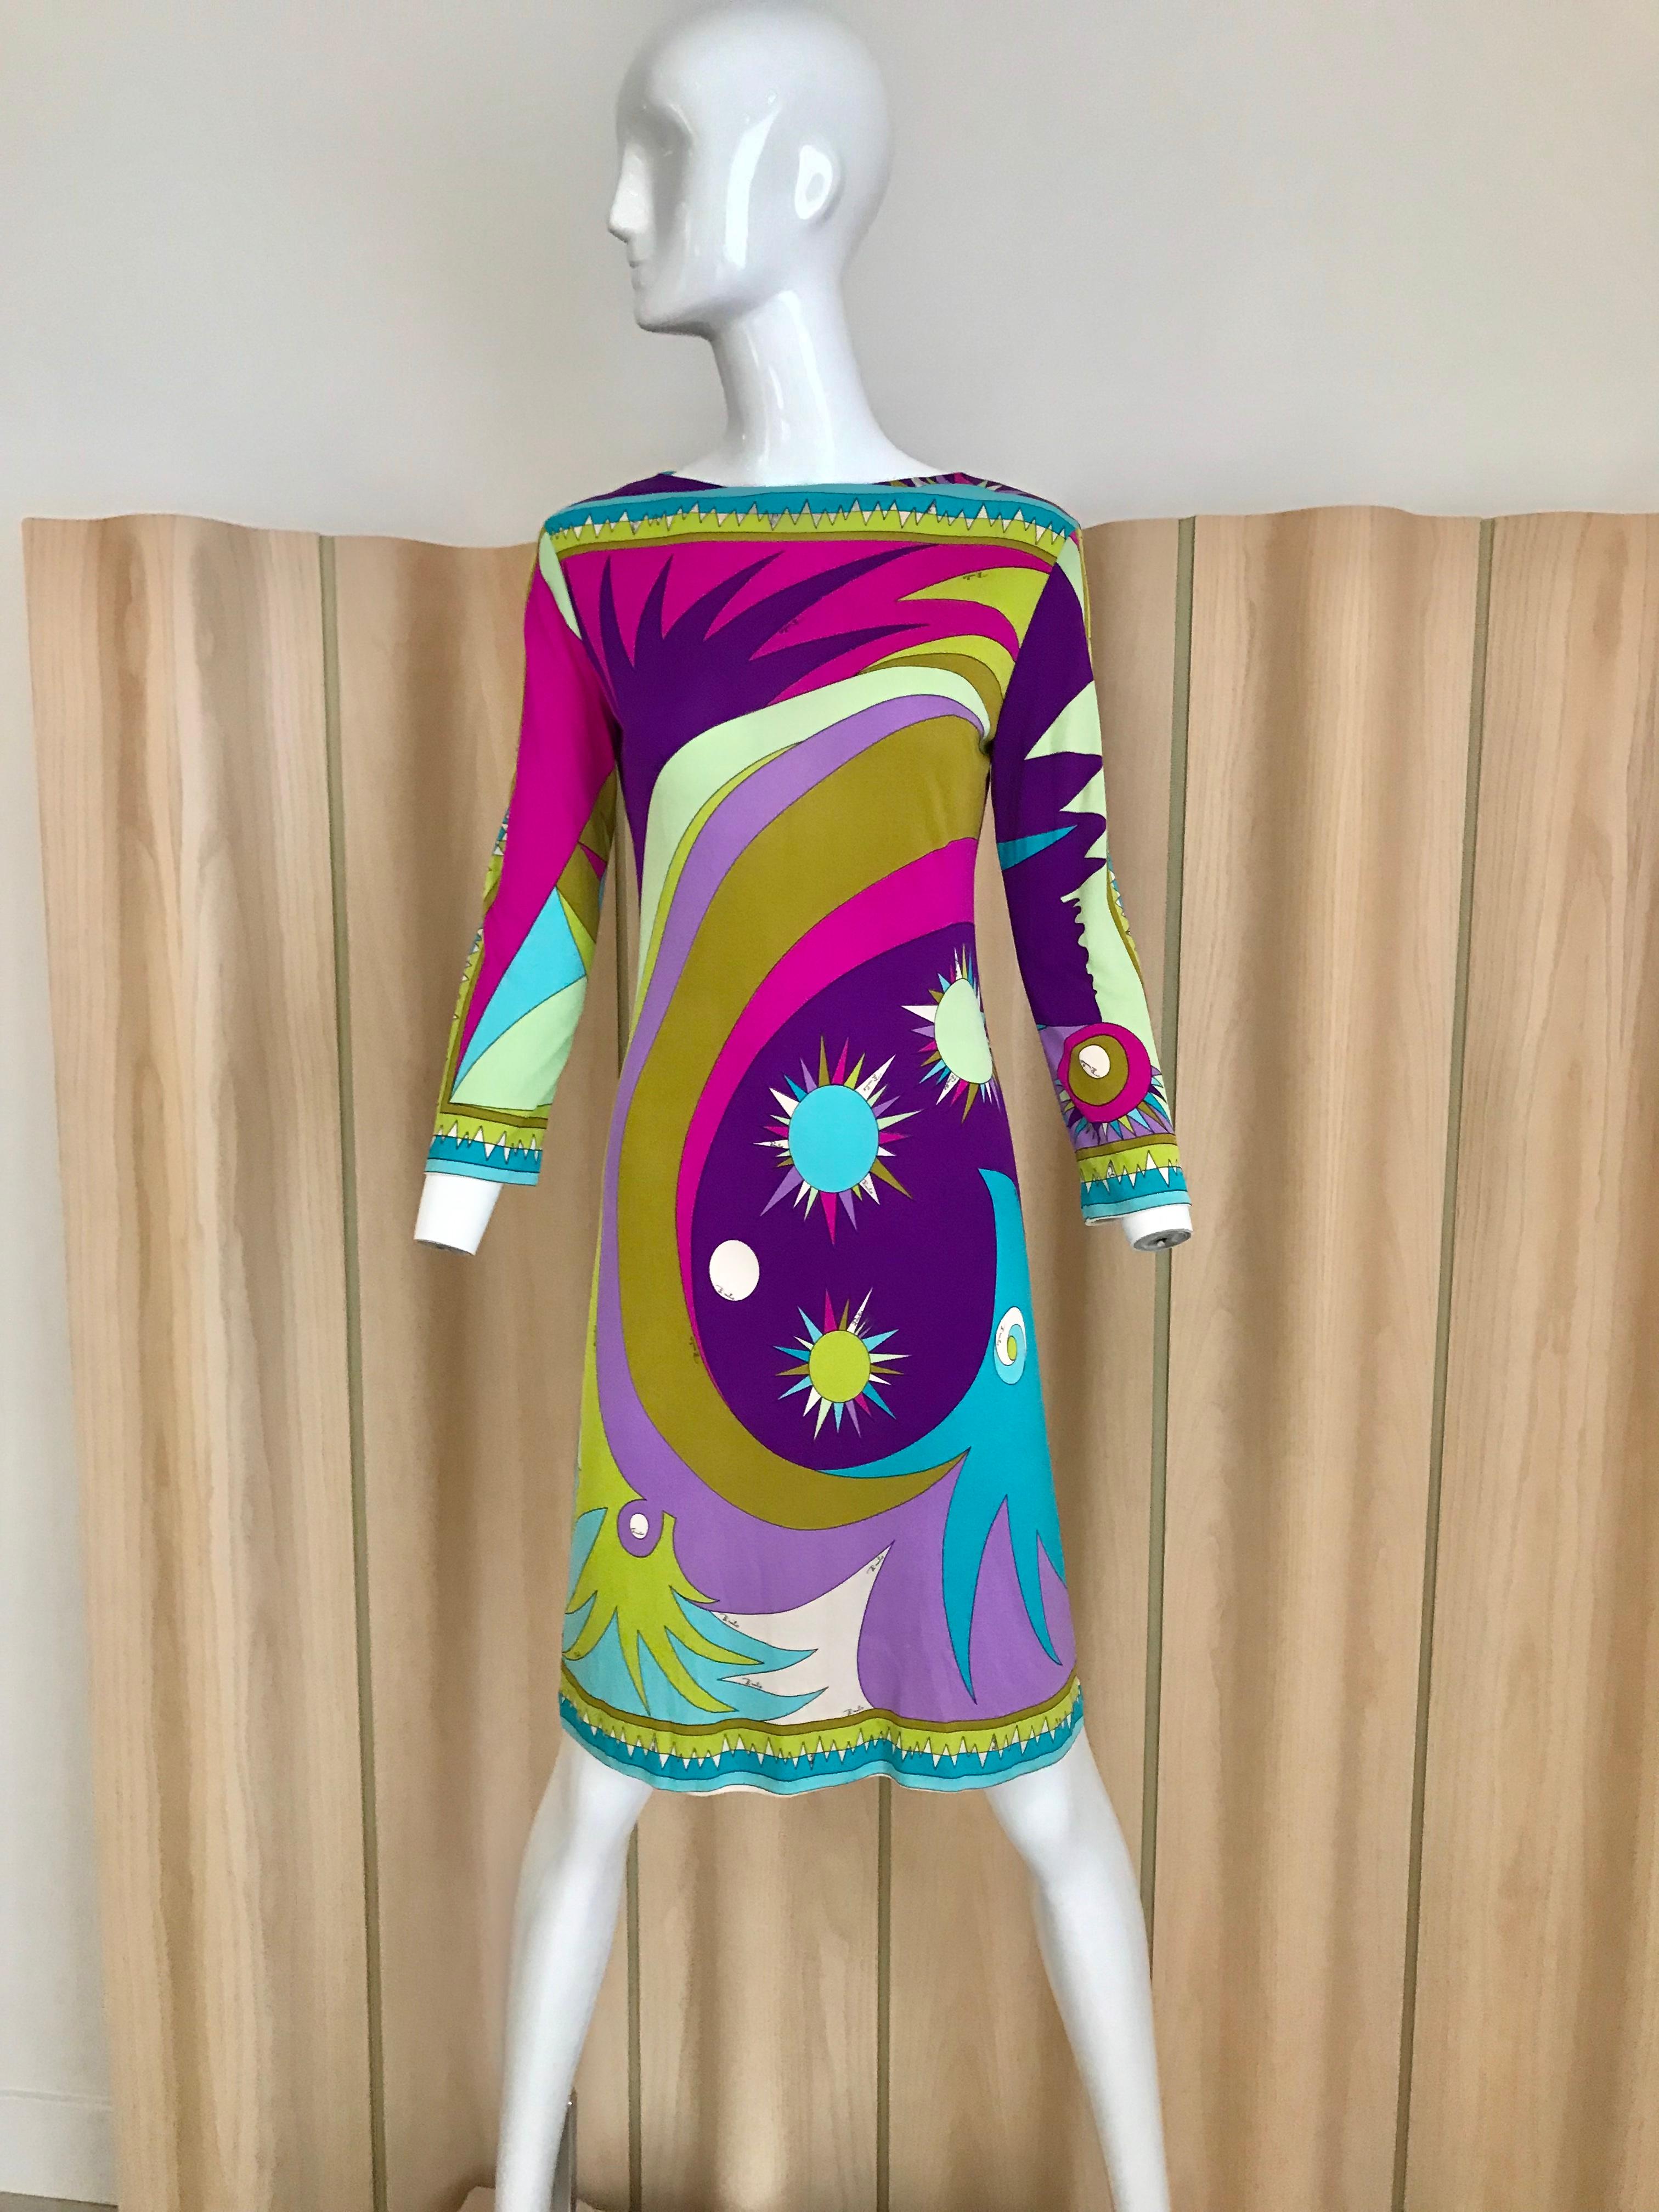 1960s soft silk jersey Pucci vintage dress in purple, magenta, pink, green psychedelic knee length long sleeve print.
Bust; 34 inches/ Hip : 34 inches